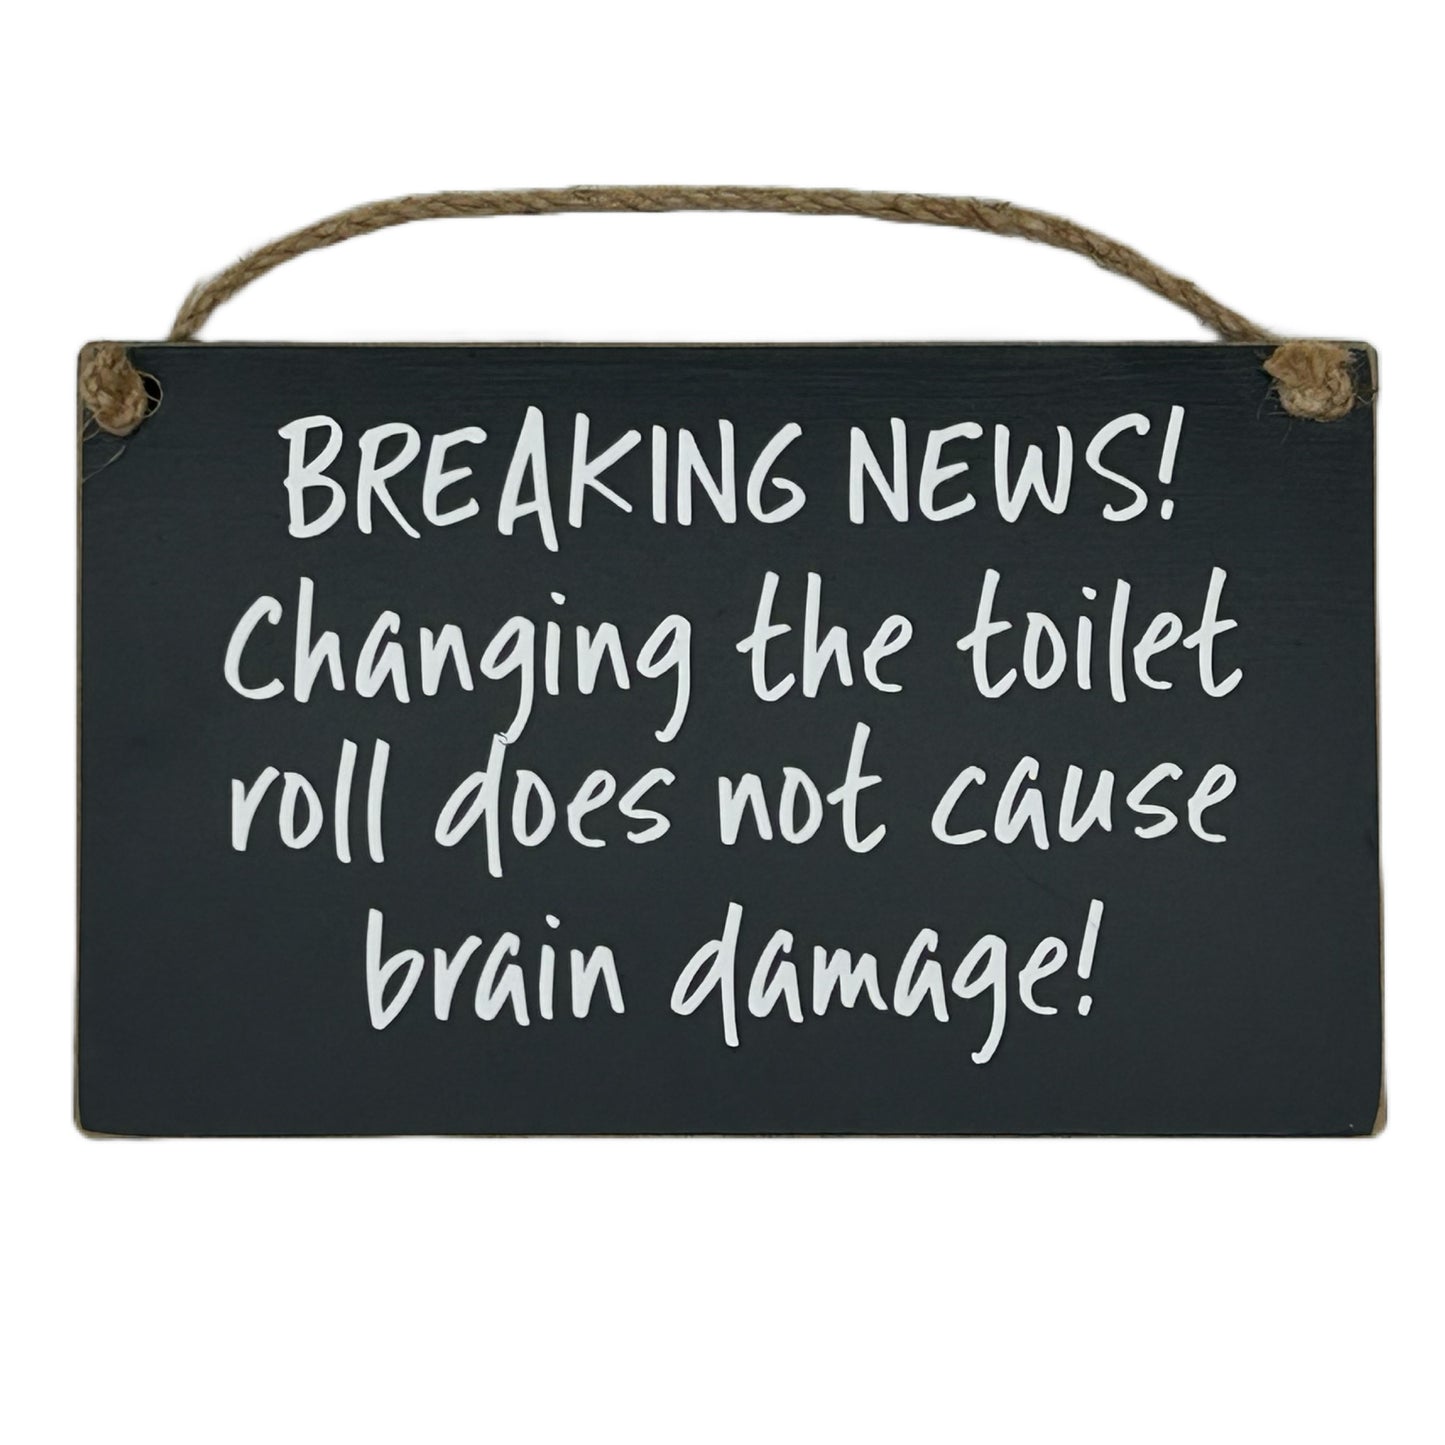 BREAKING NEWS! Changing the toilet roll does NOT cause brain